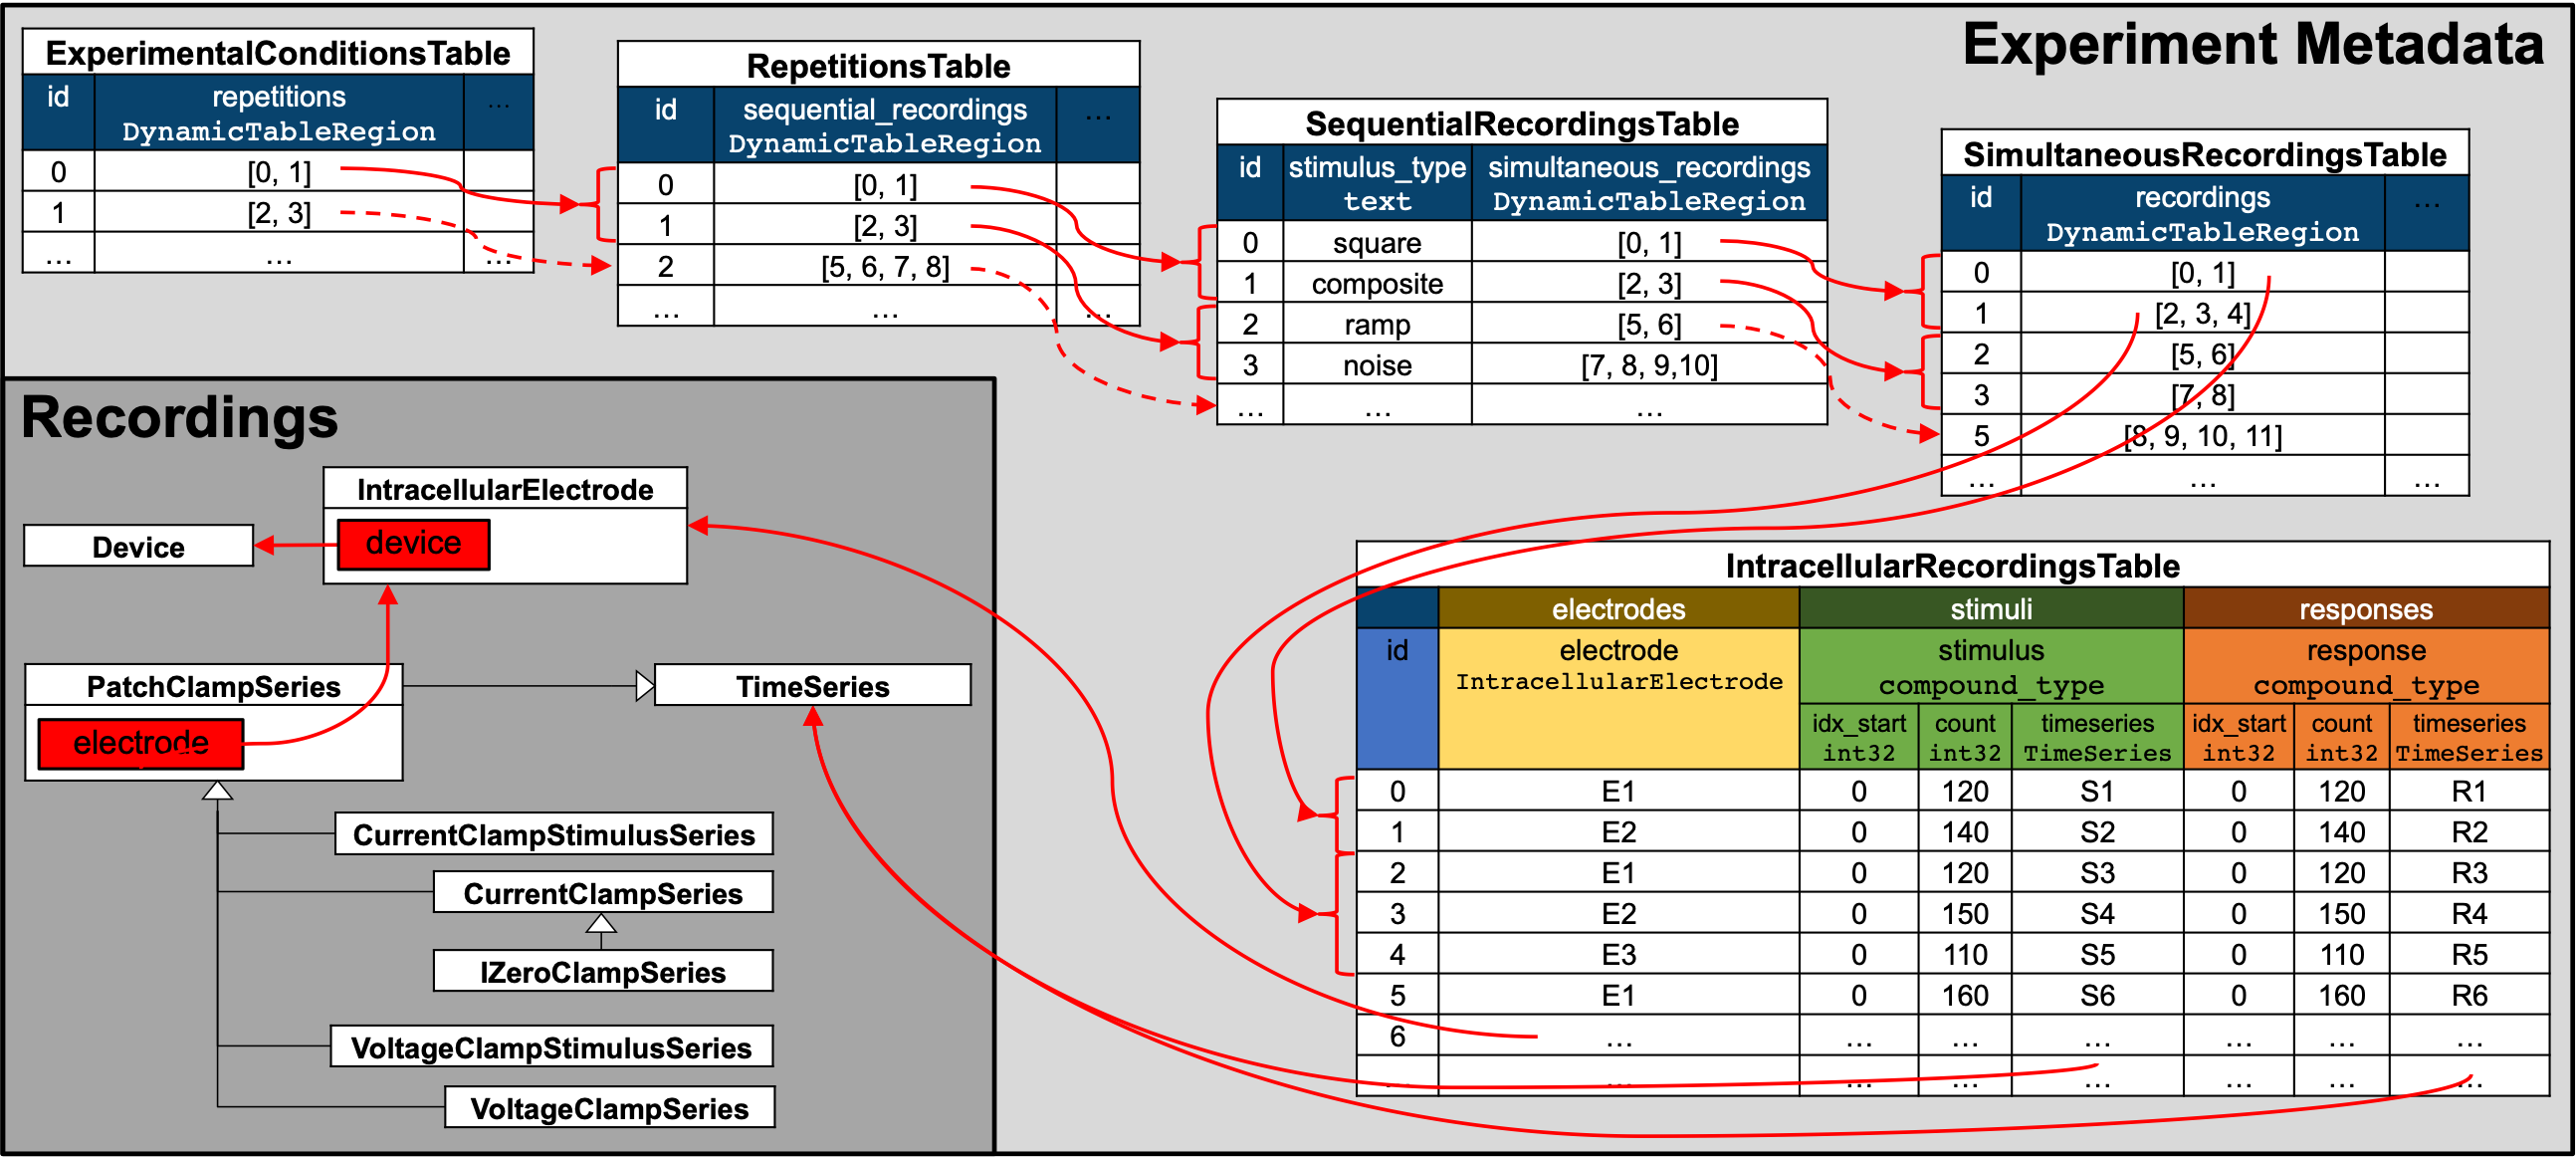 Intracellular electrophysiology metadata table hierarchy